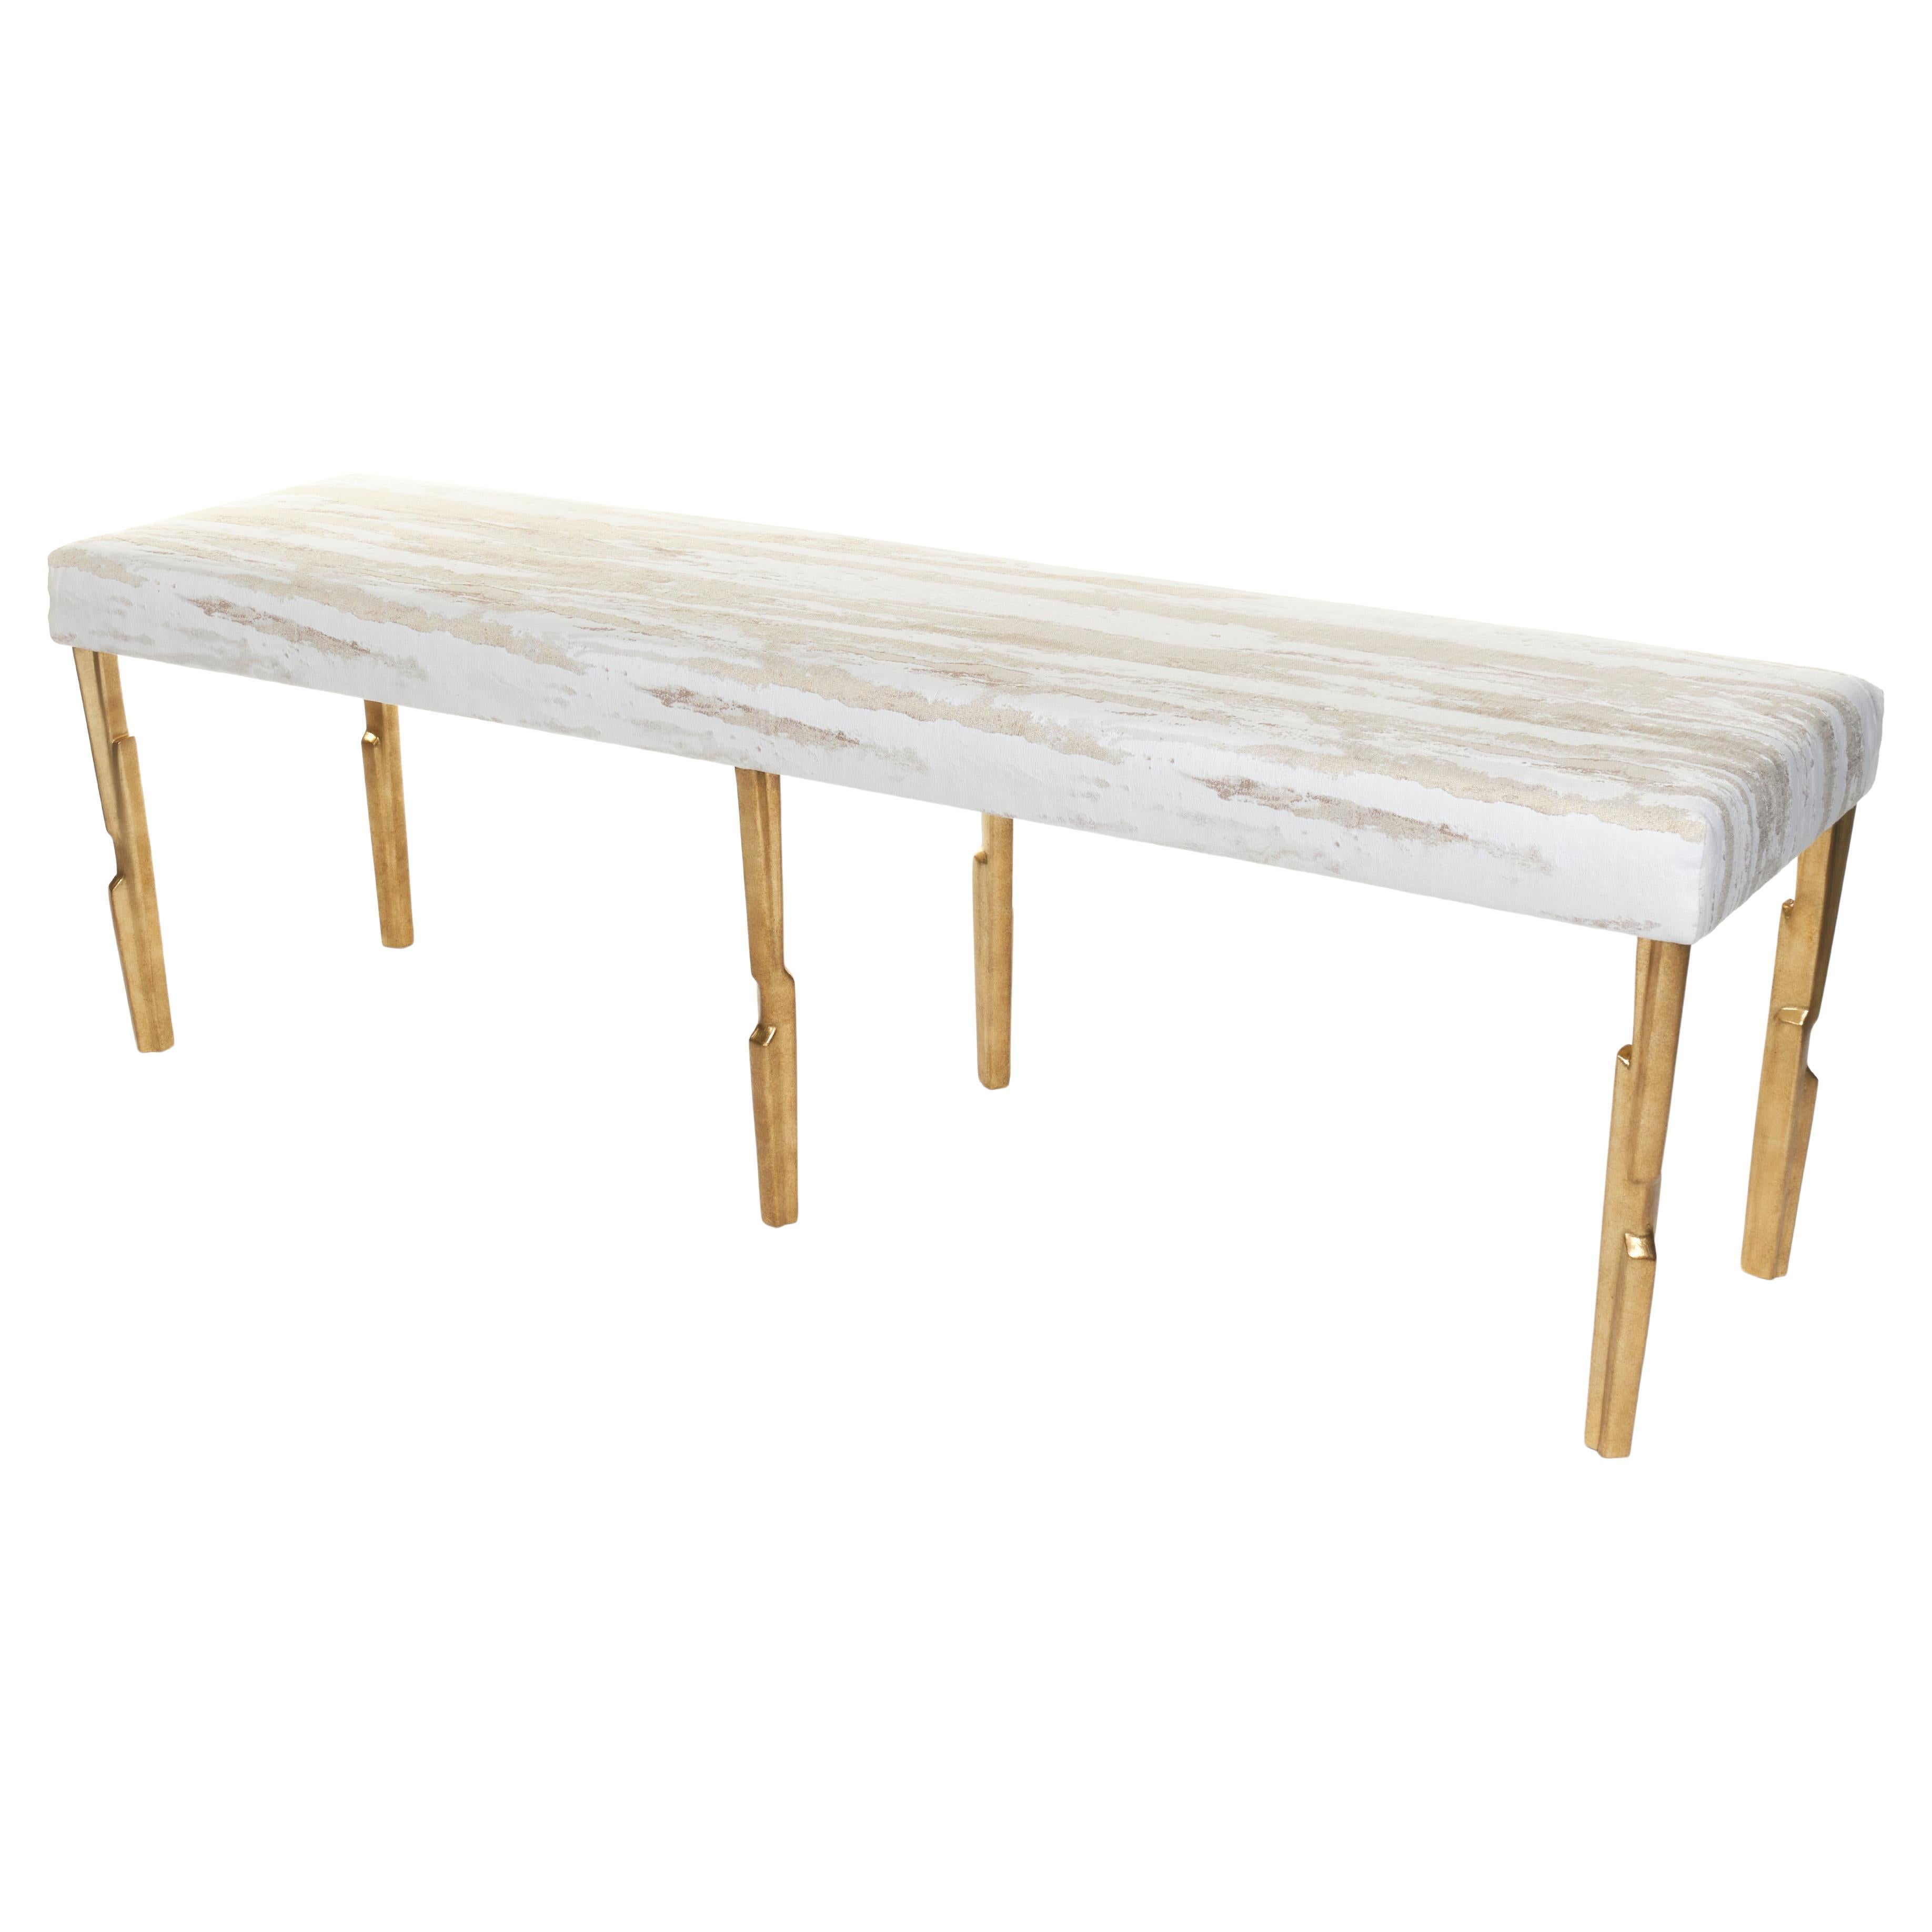 Modern Linea Bench No.1, Antique Gold Finish with Second Firing 2 seat pad